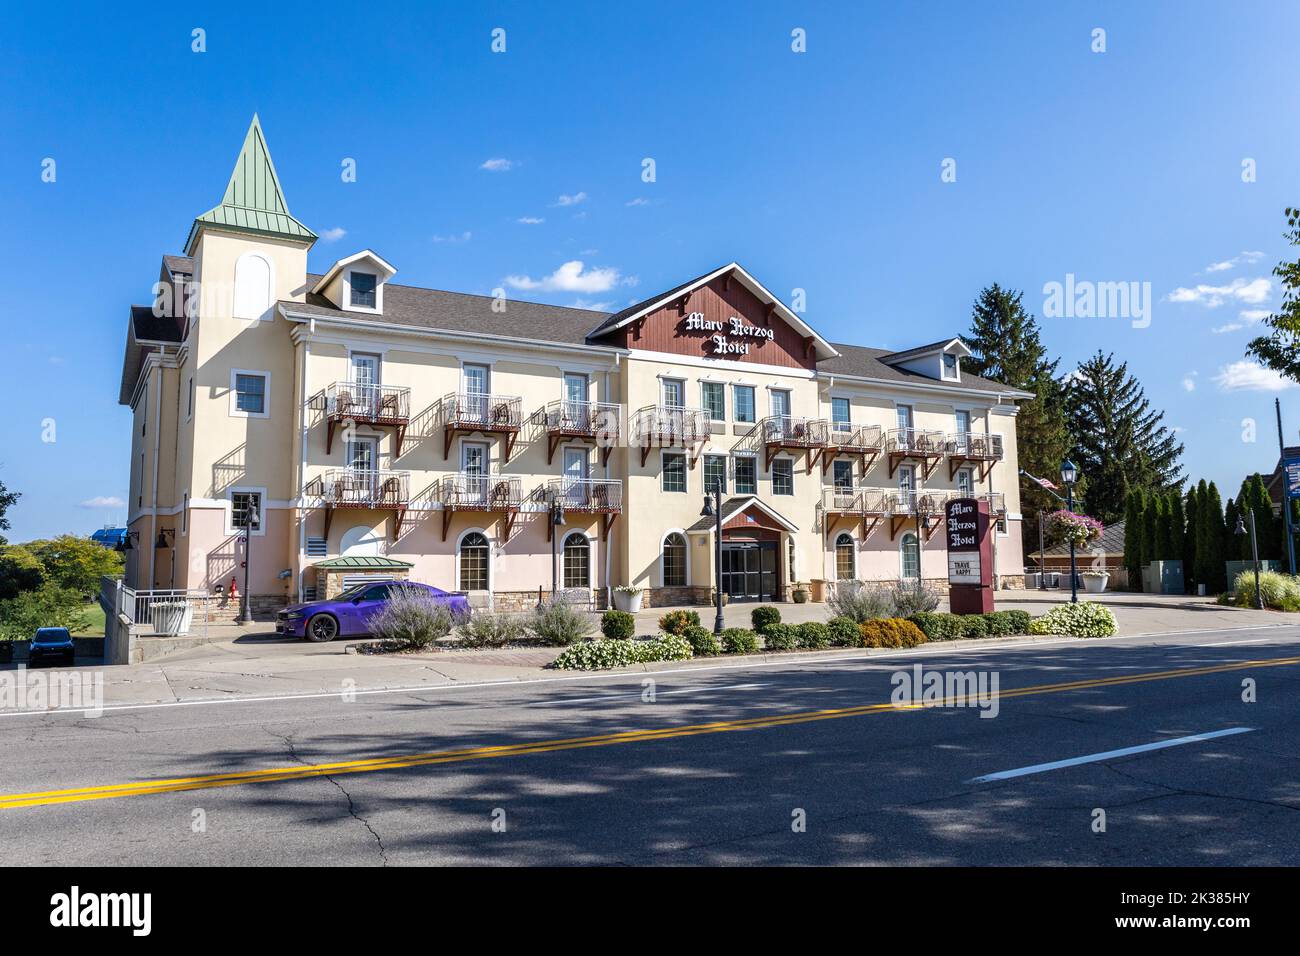 The Marv Herzog Hotel In Frankenmuth Michigan America Named After A Famous American Polka Player Stock Photo